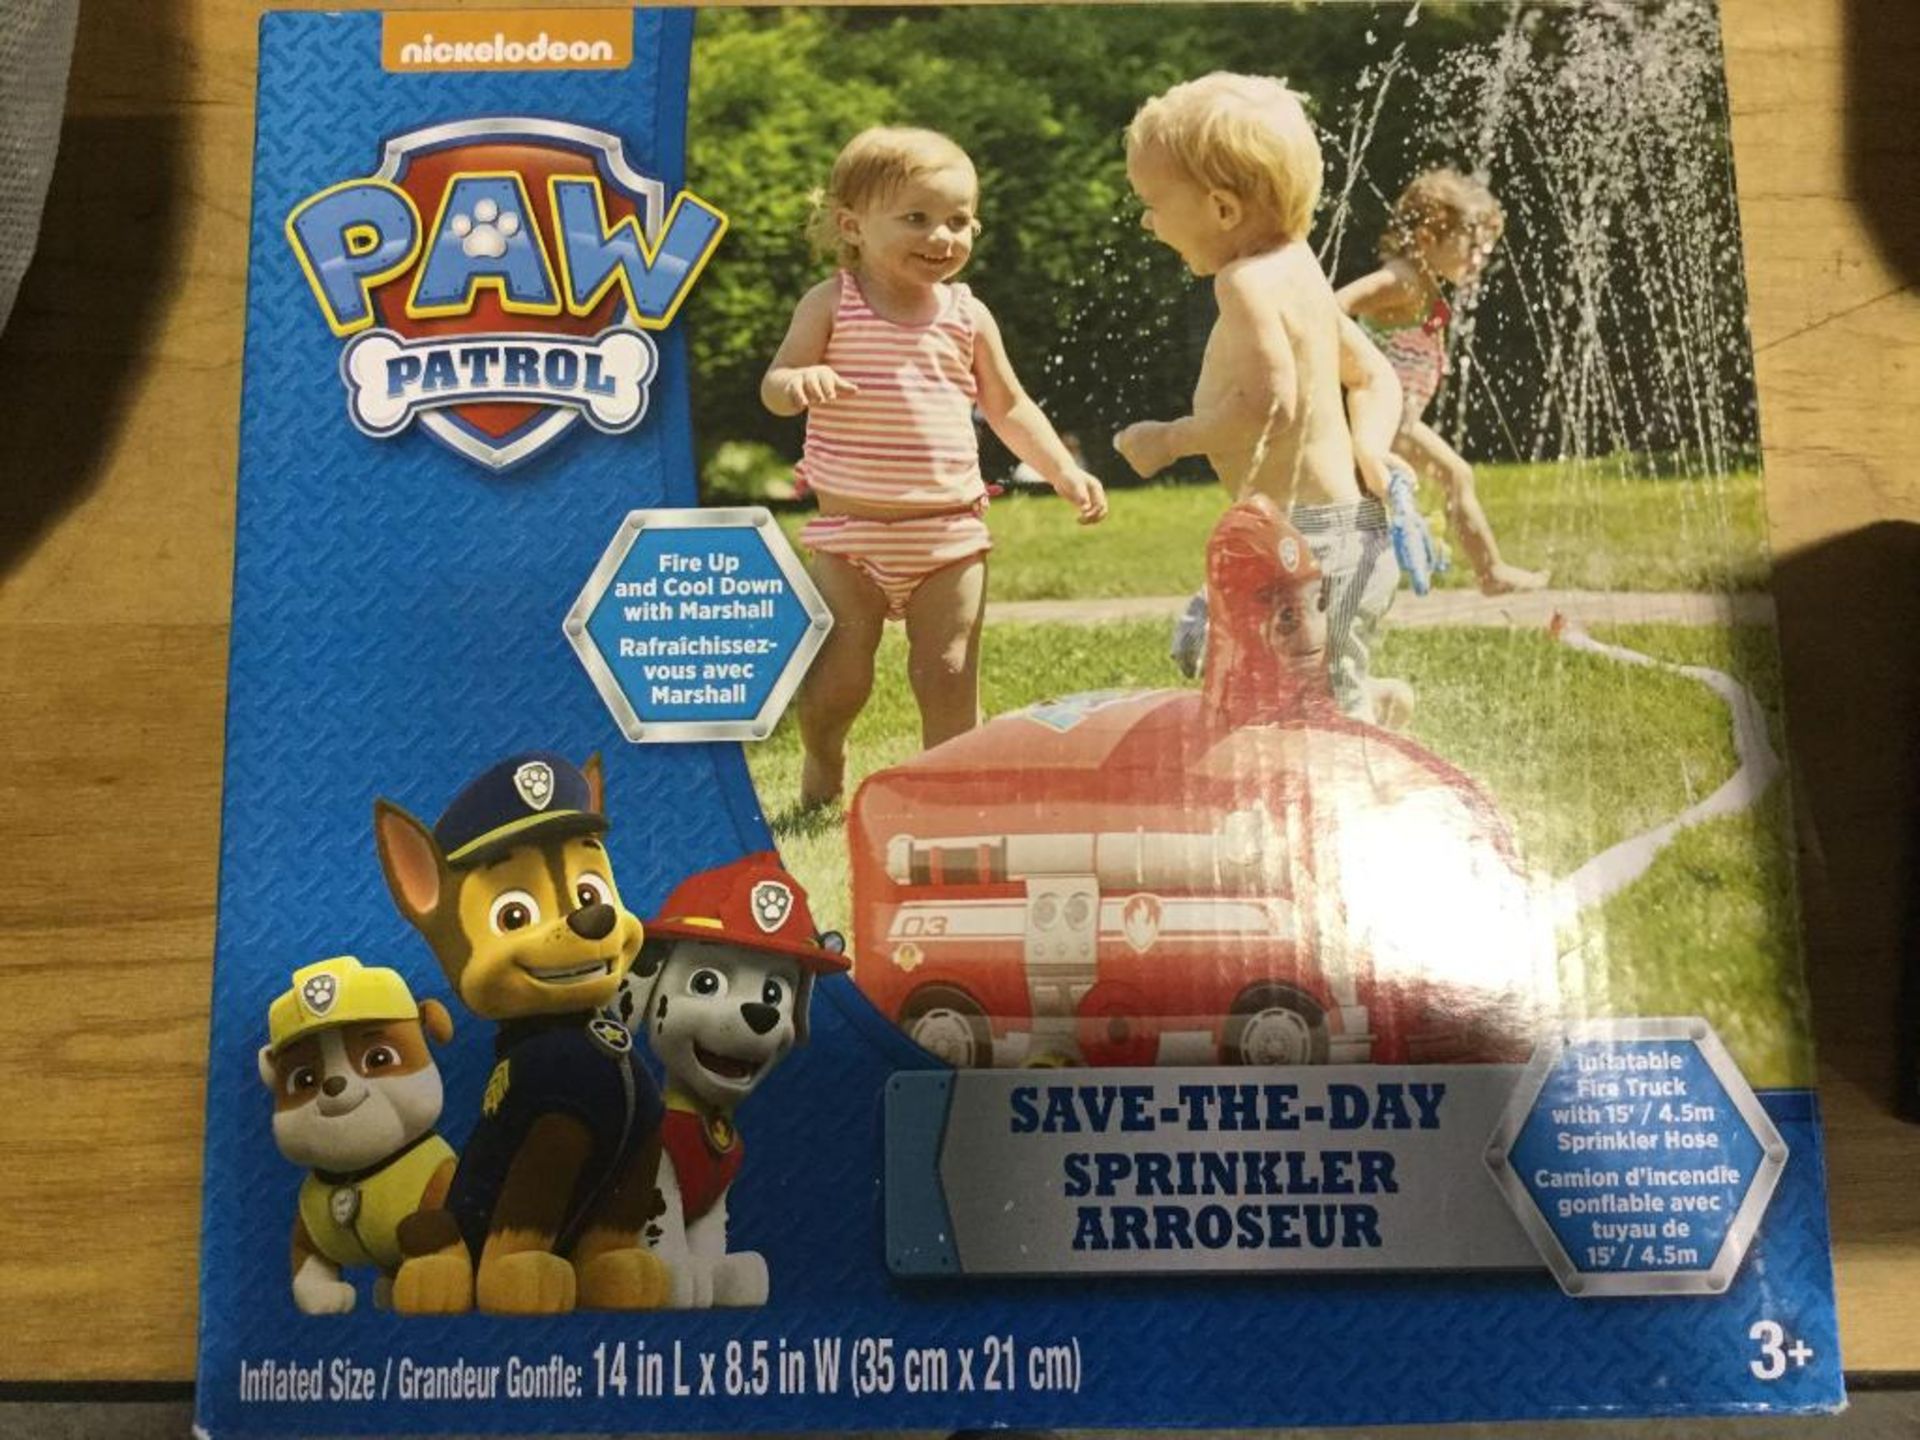 Paw Patrol Toy - Inflatable Fire Truck with 15' Sprinkler hose